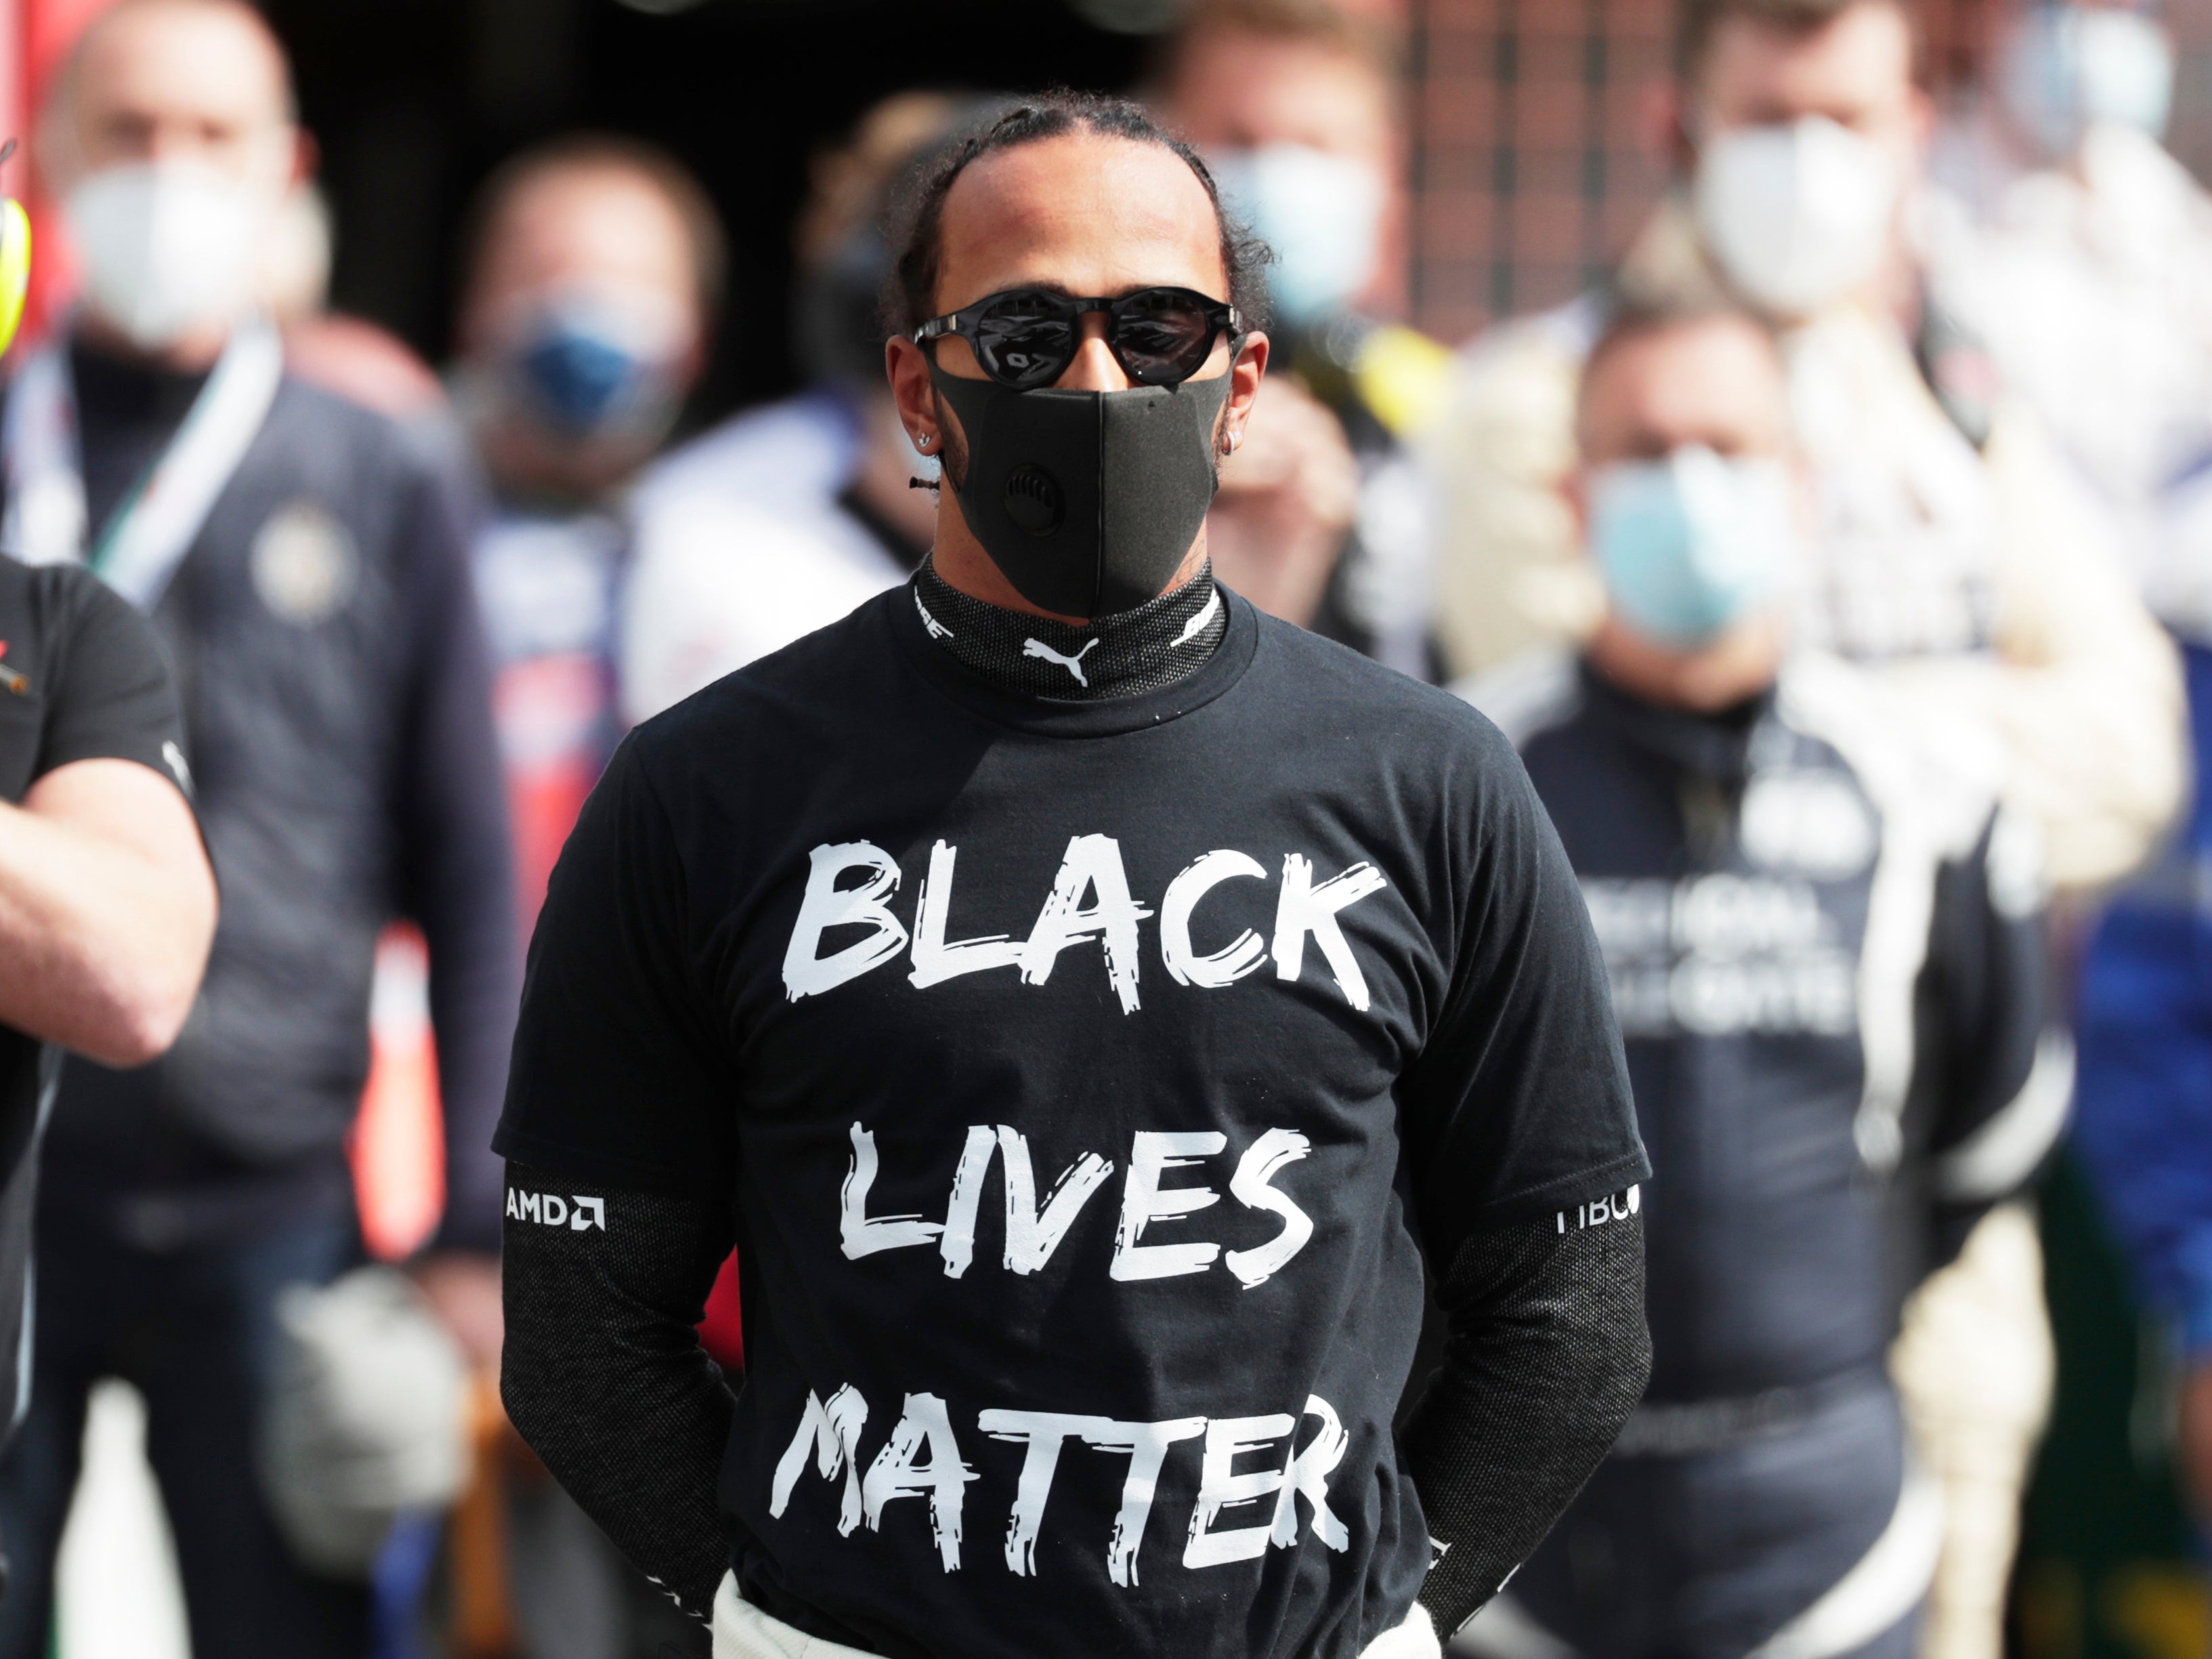 Bernie Ecclestone has accused Lewis Hamilton of being used by Black Lives Matter